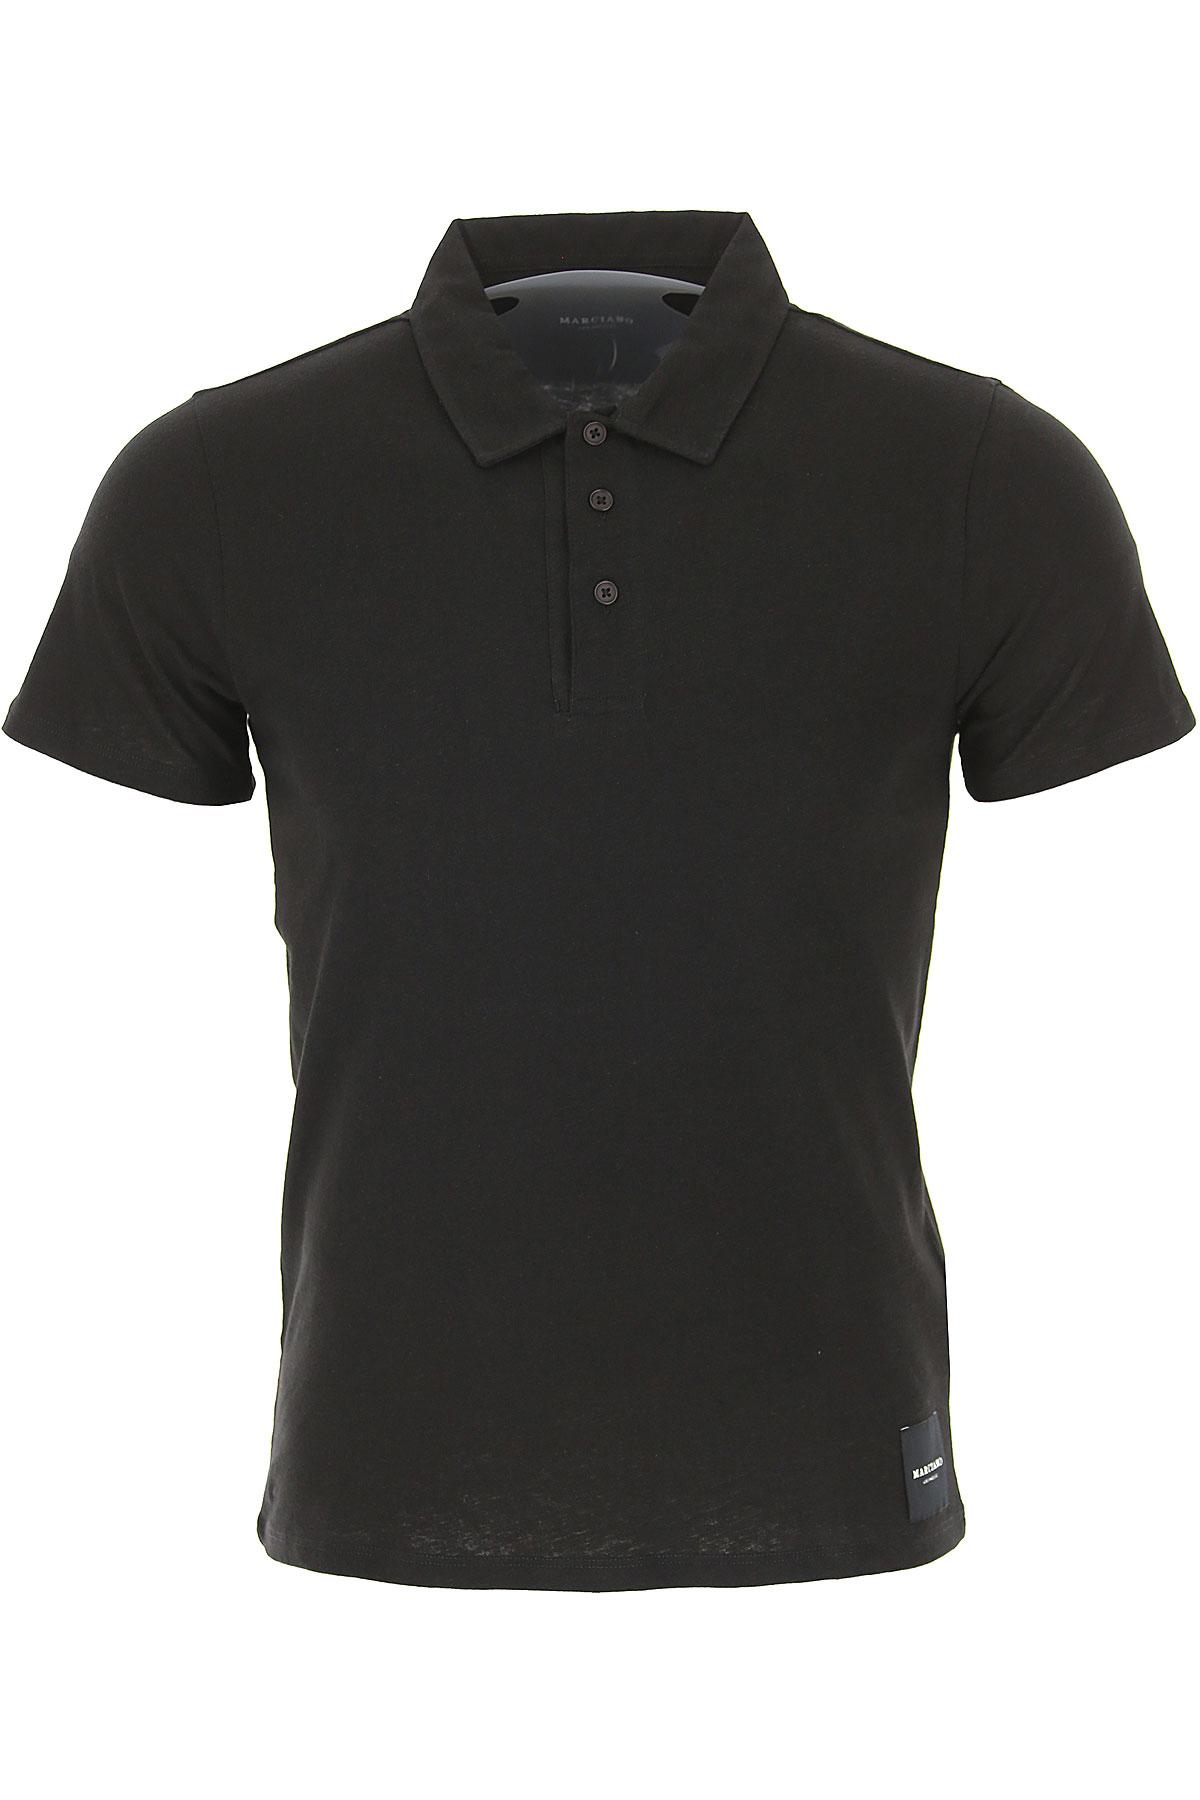 Guess Polo Shirt For Men On Sale in Black for Men - Lyst